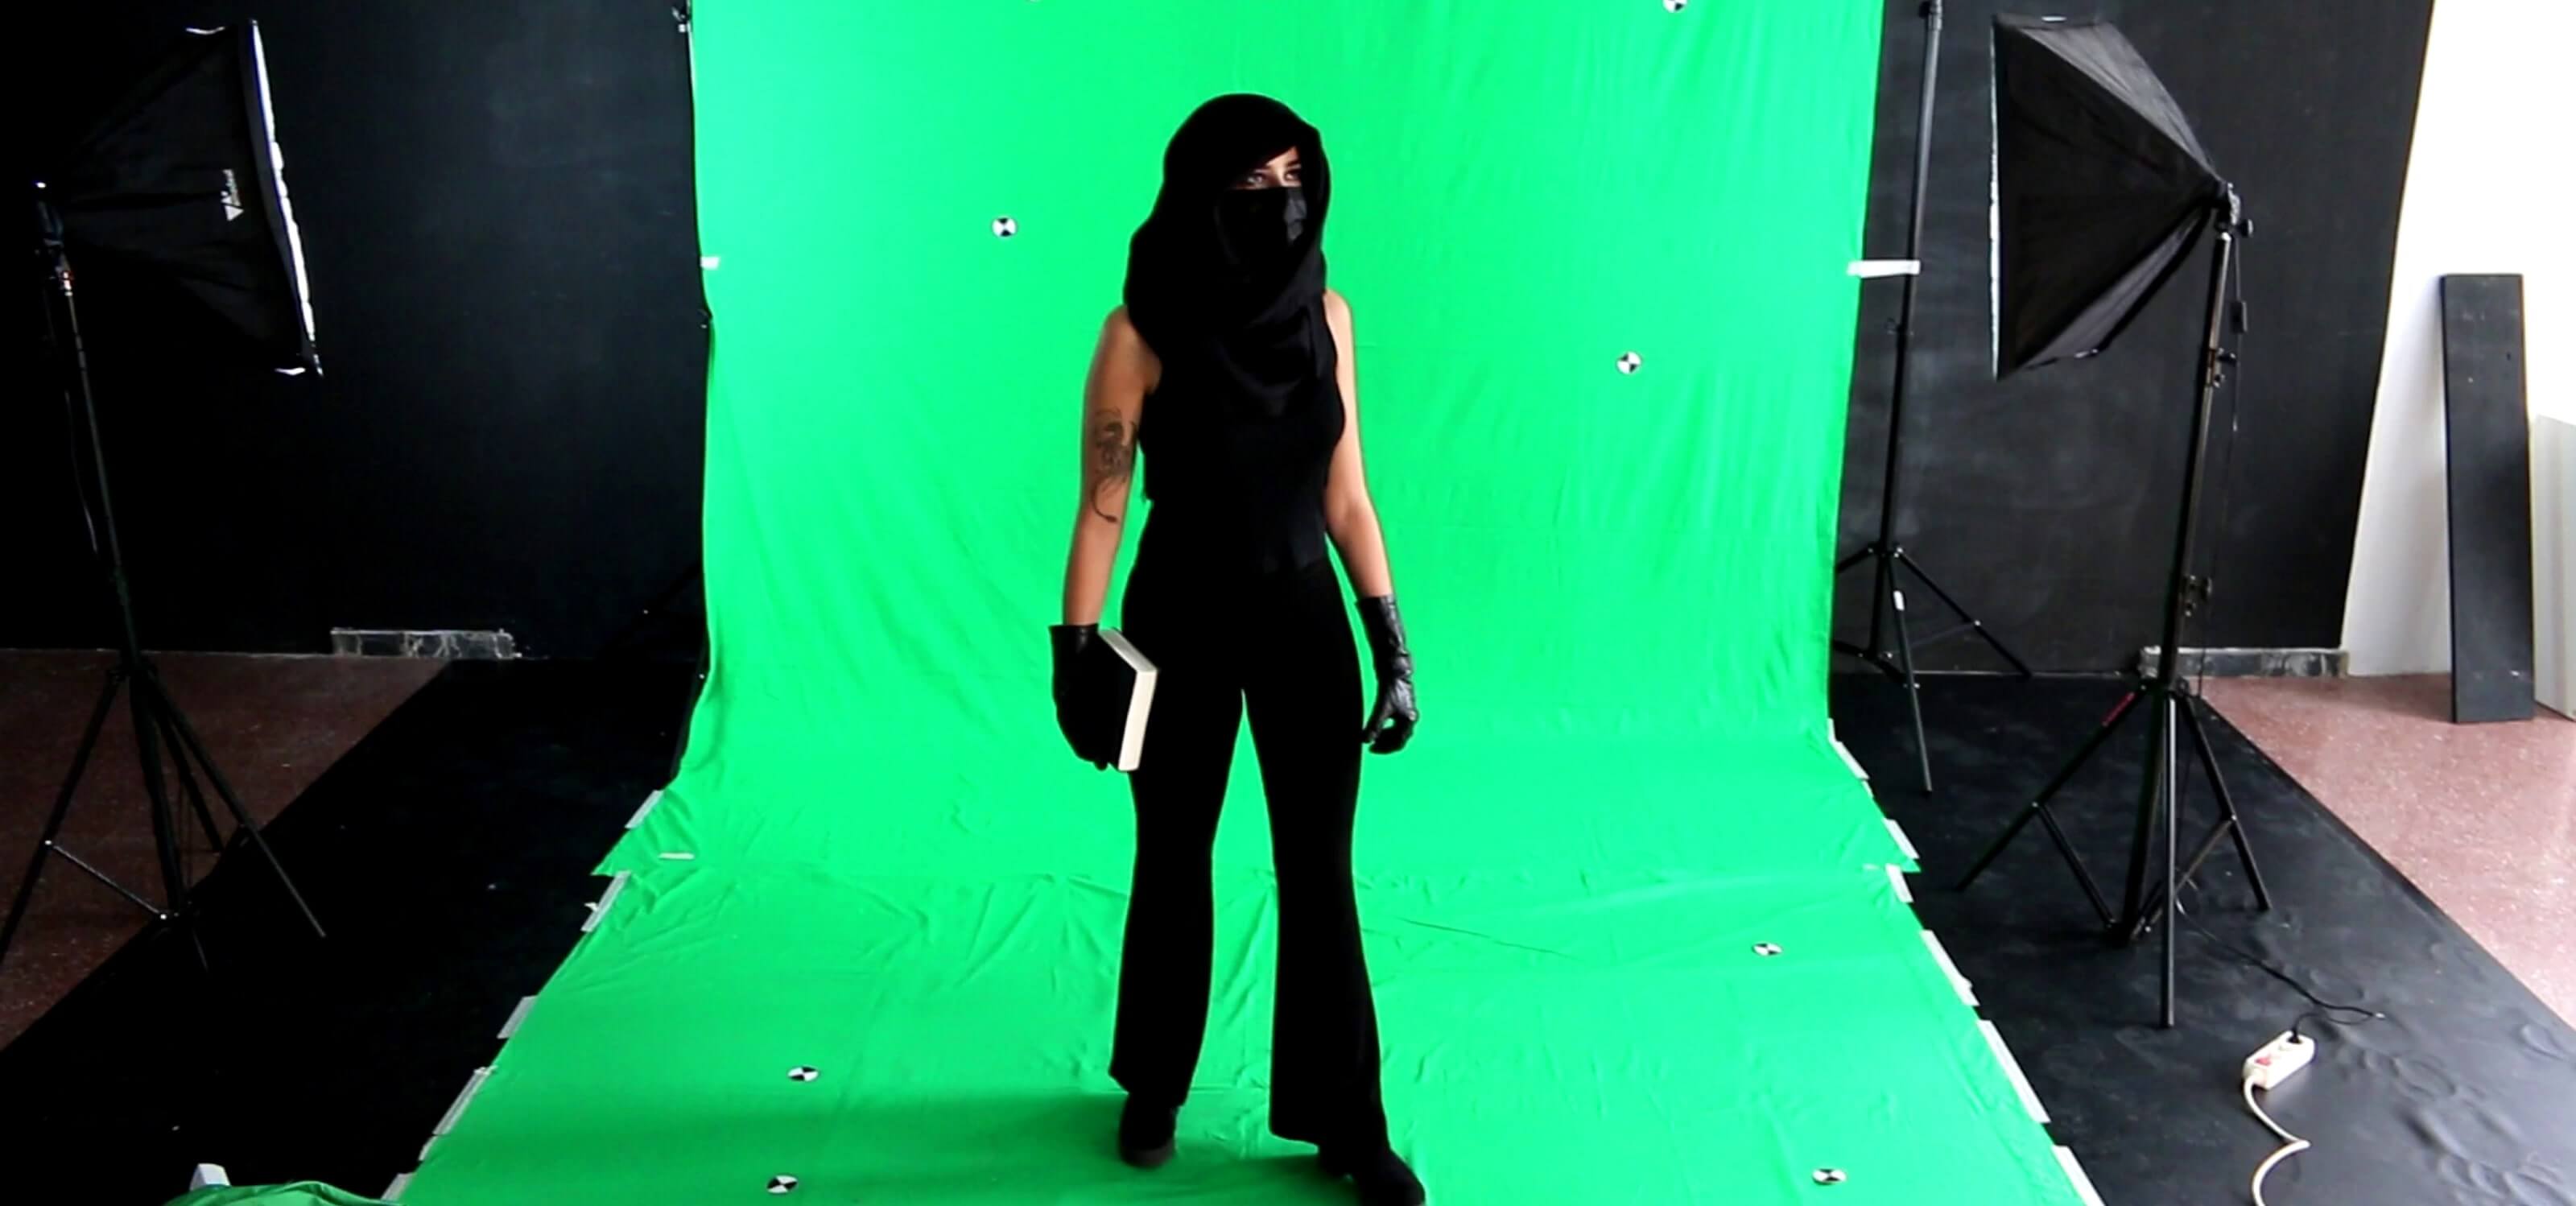 A student is dressed up and standing in front of a green screen.